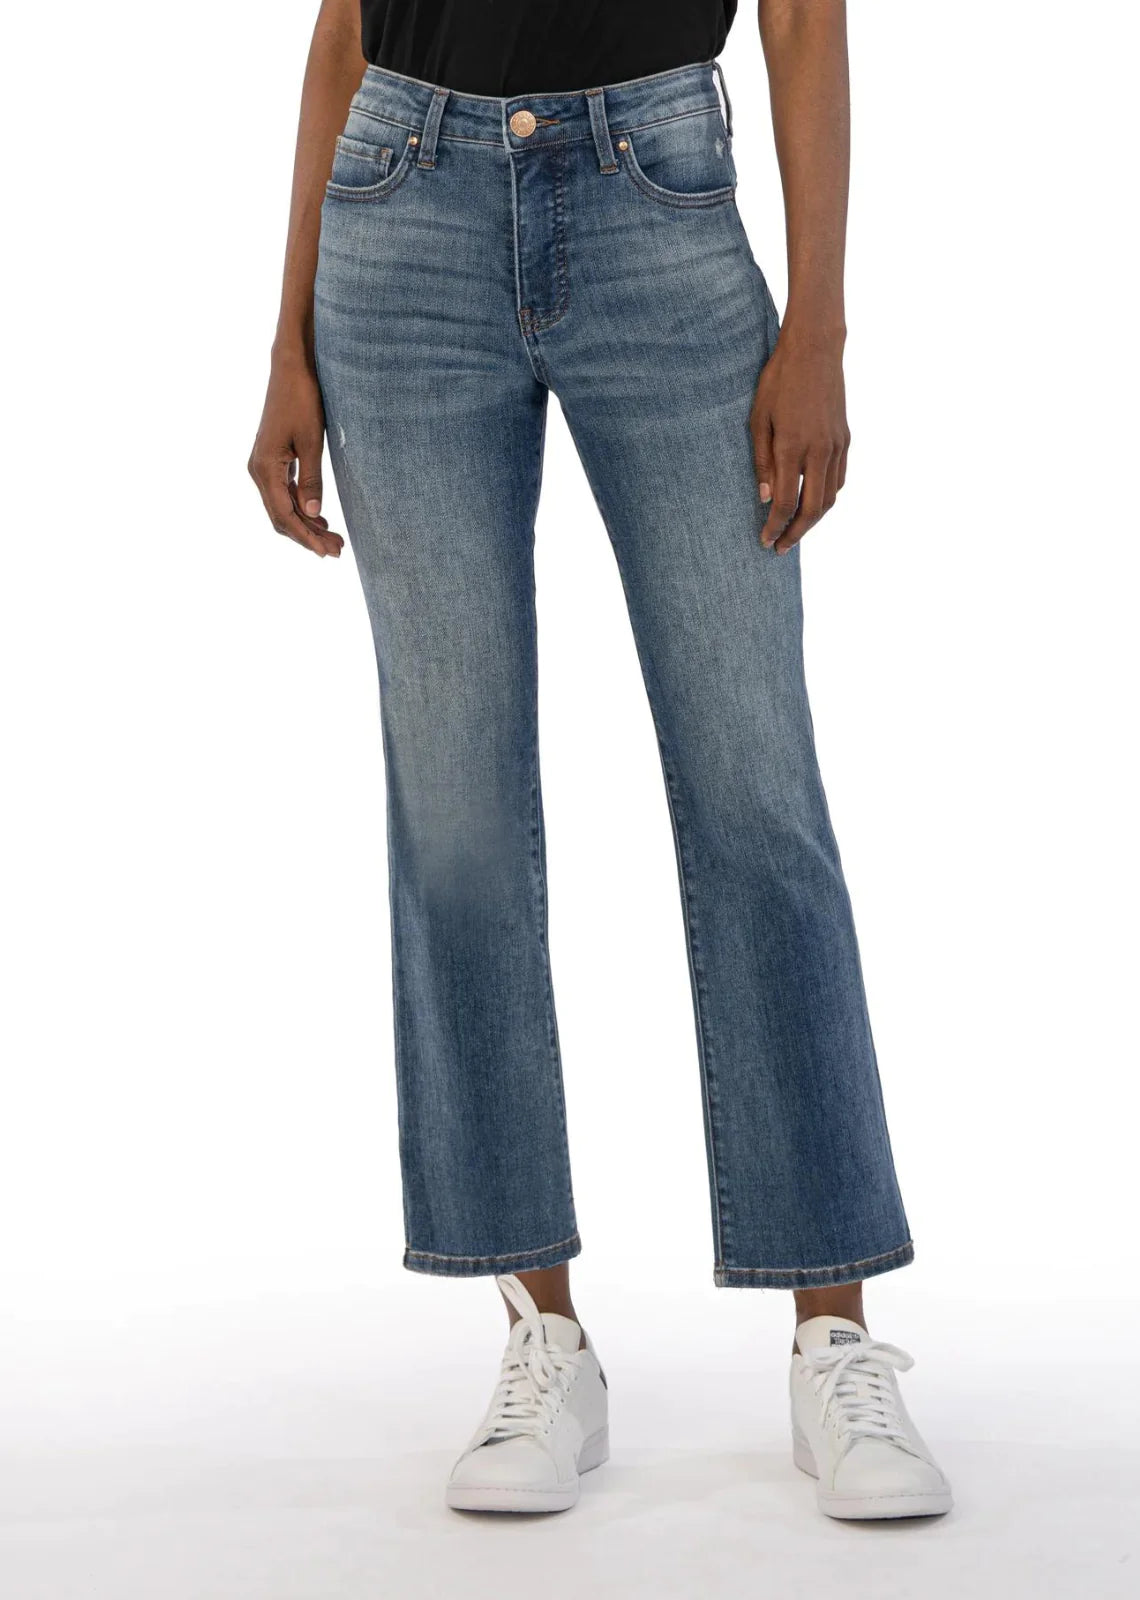 Kut from the Kloth Kelsey High Rise Ankle Flare Reassuring Jeans